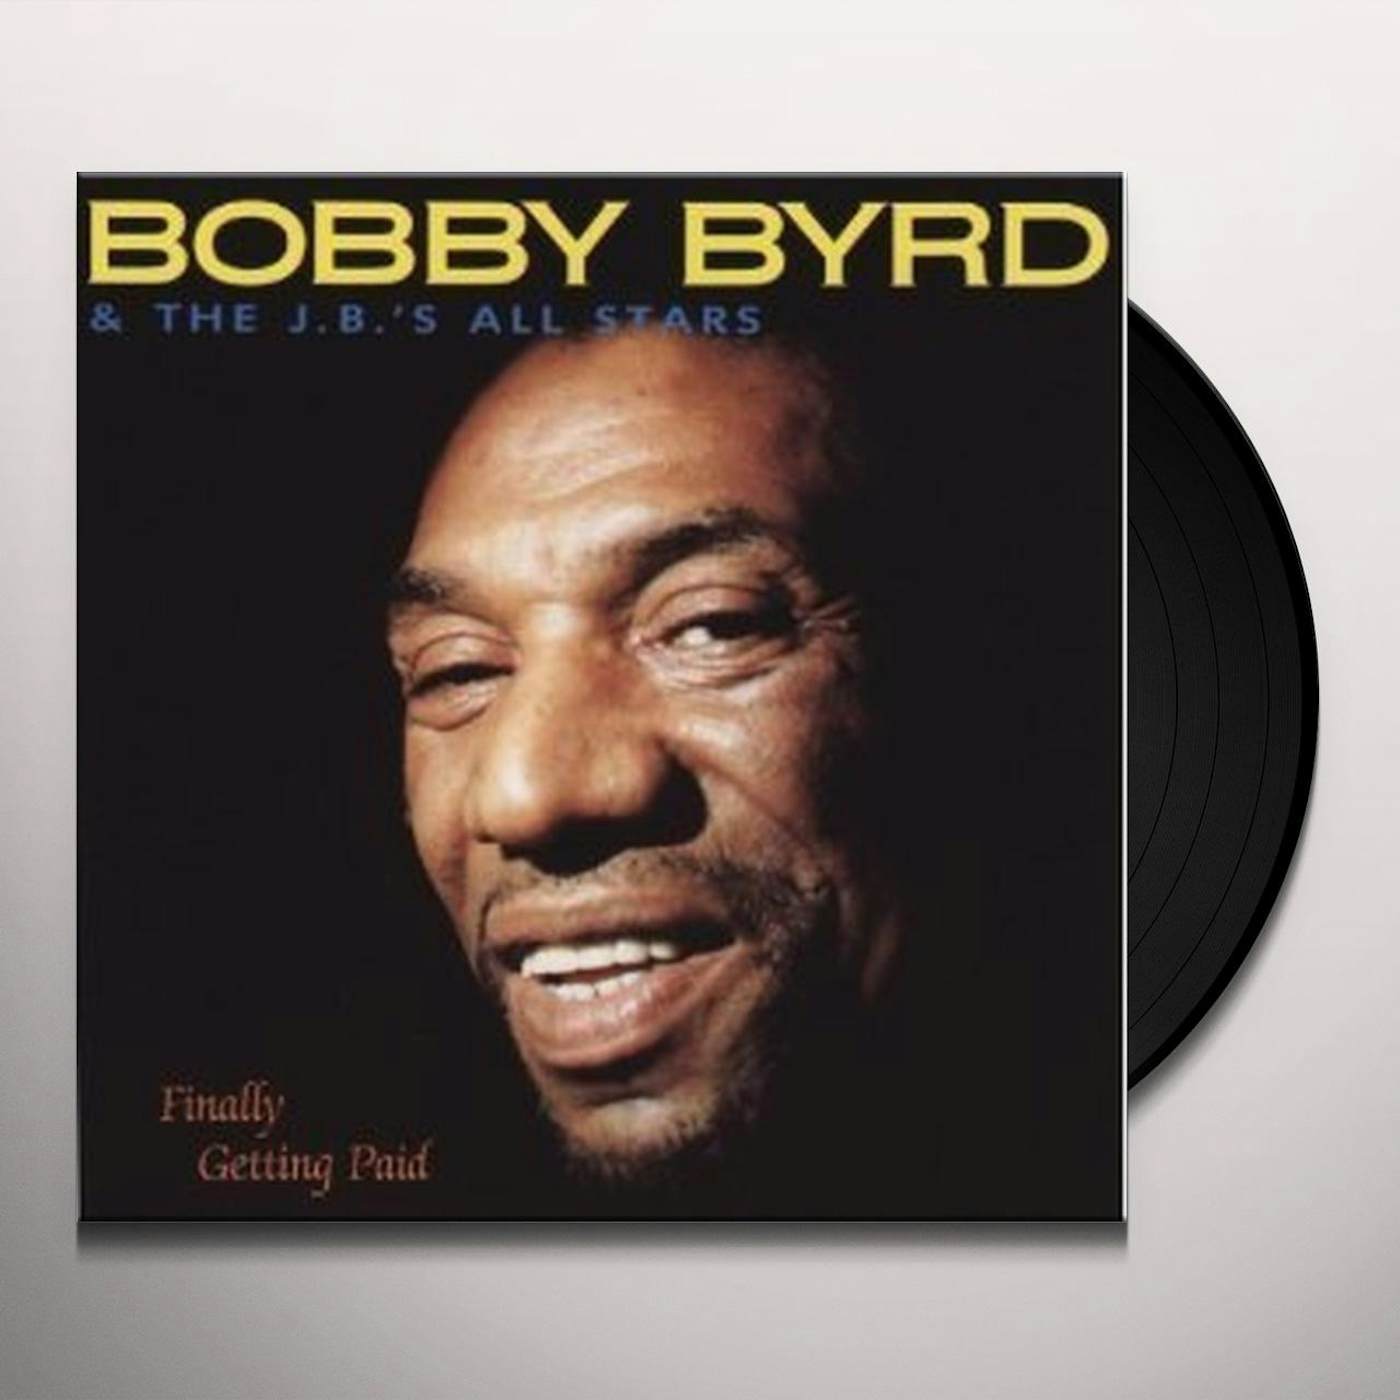 Bobby Byrd & Jb's FINALLY GETTING PAID Vinyl Record - Holland Release